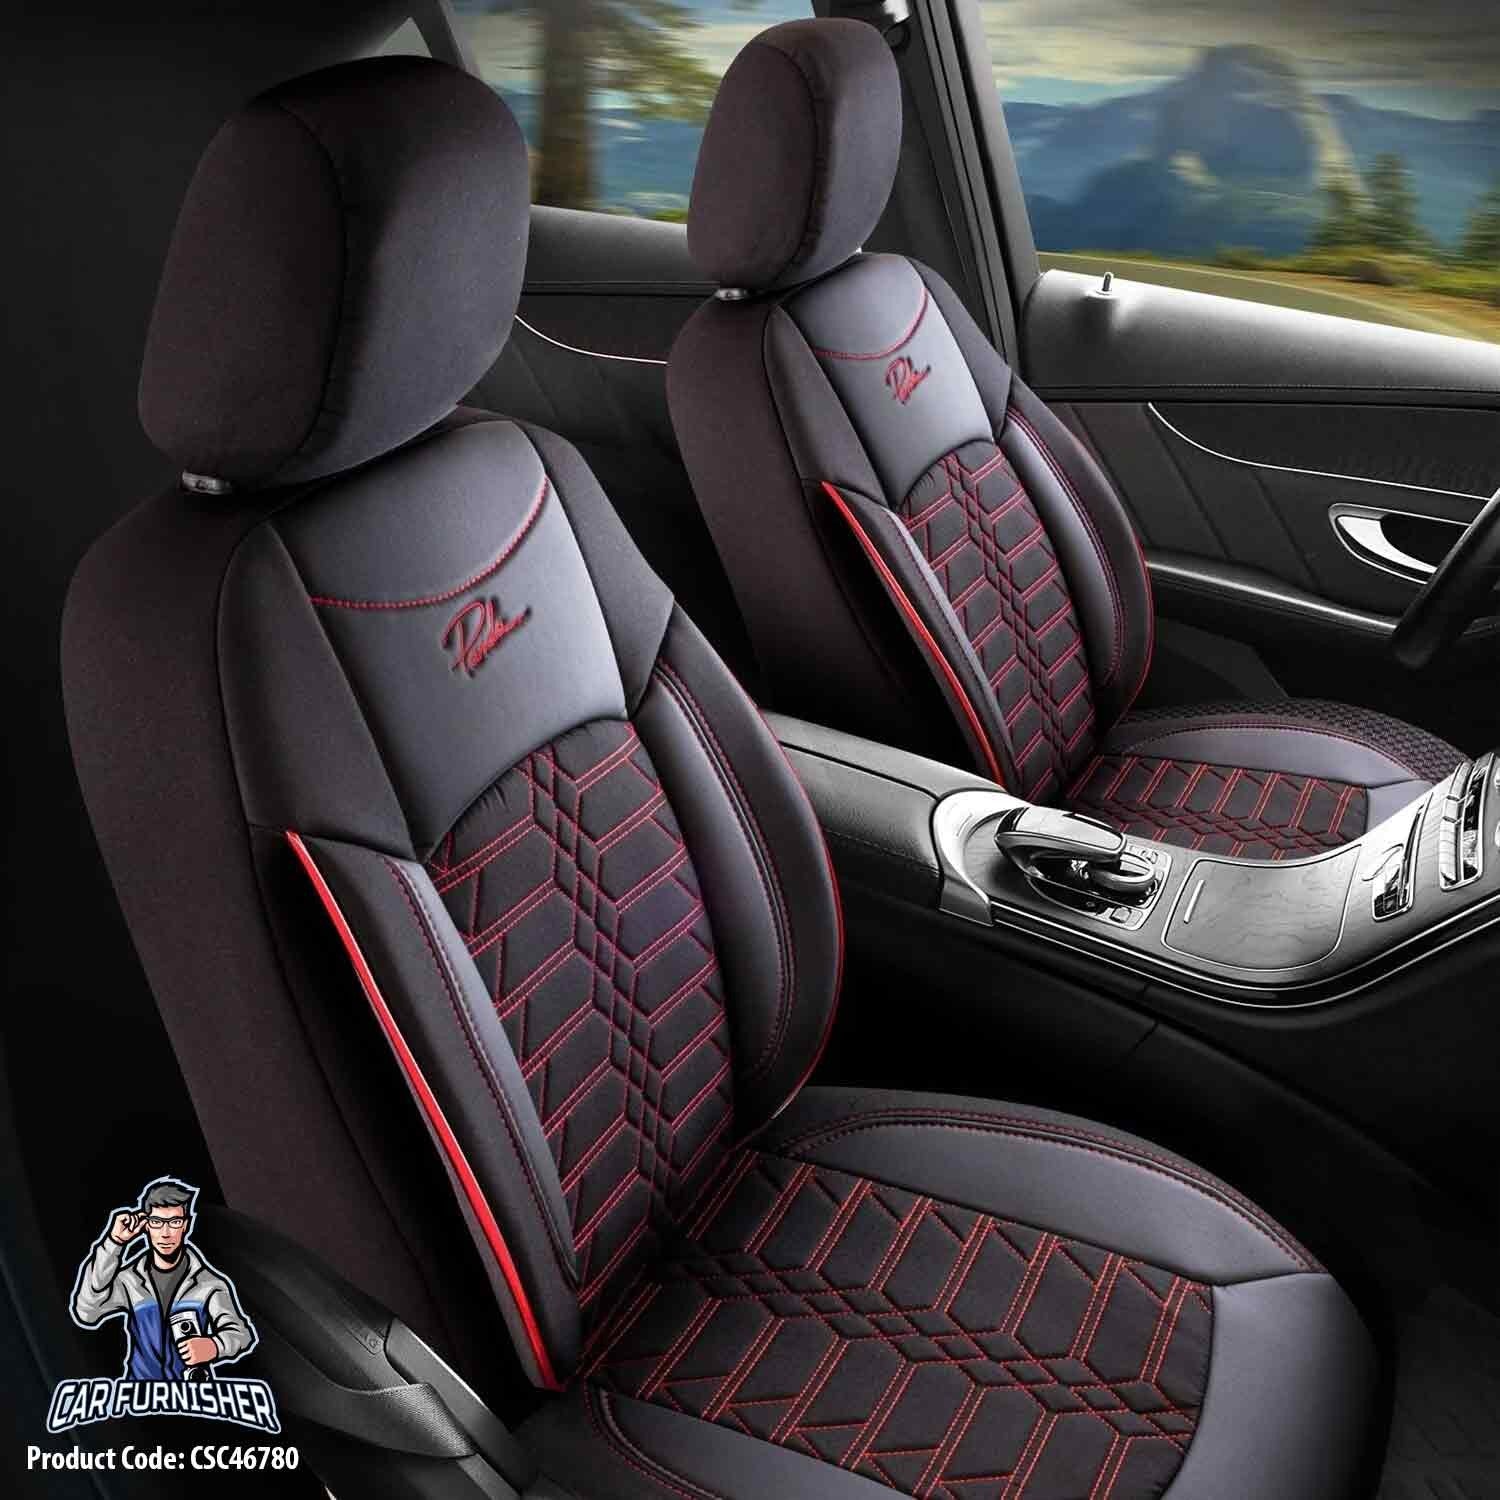 Mercedes 190 Seat Covers Venetian Design Red 5 Seats + Headrests (Full Set) Leather & Jacquard Fabric